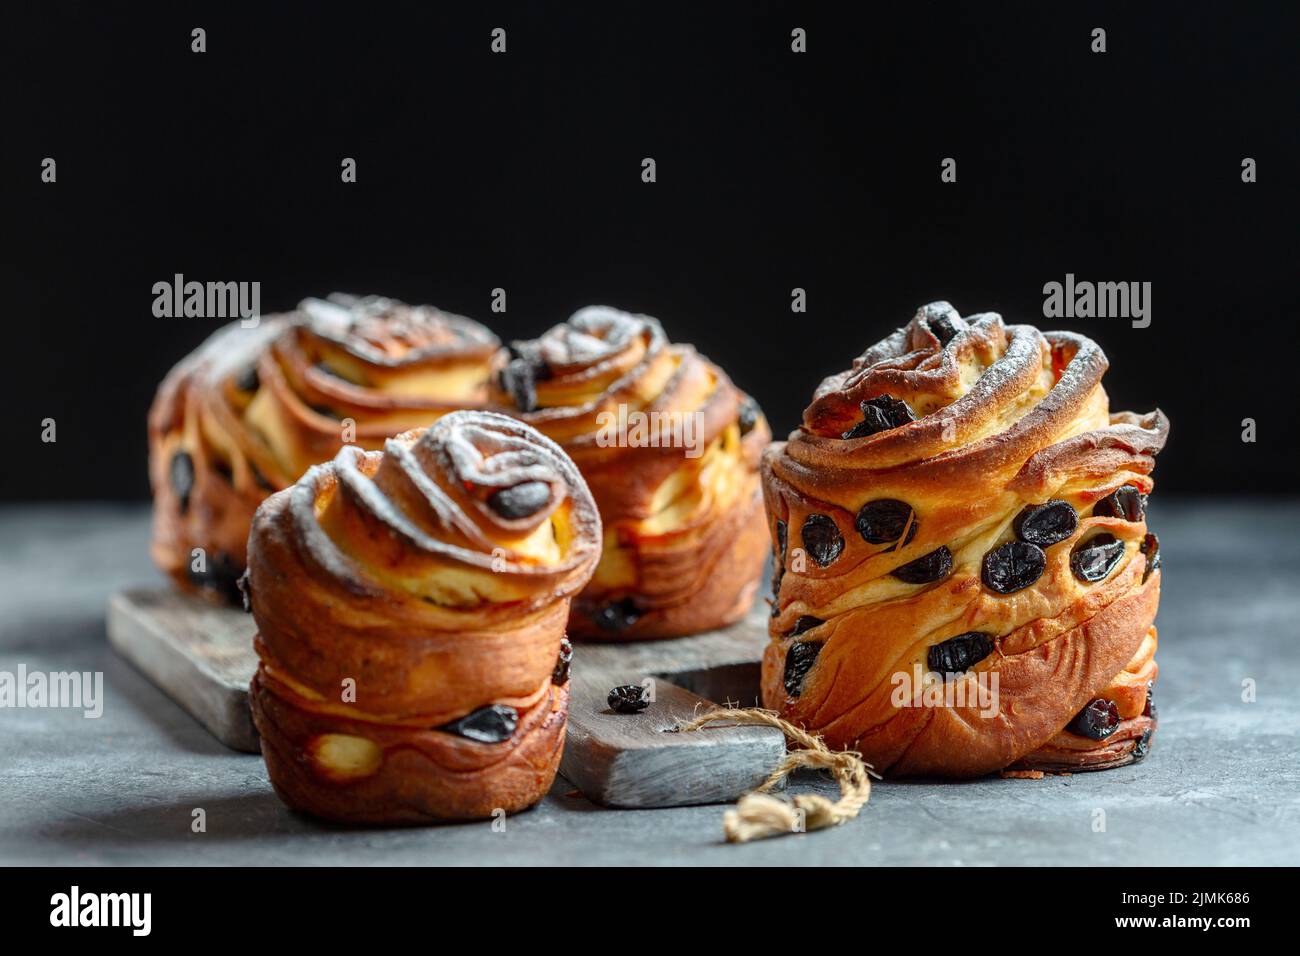 Homemade modern Easter pastry cruffins. Stock Photo